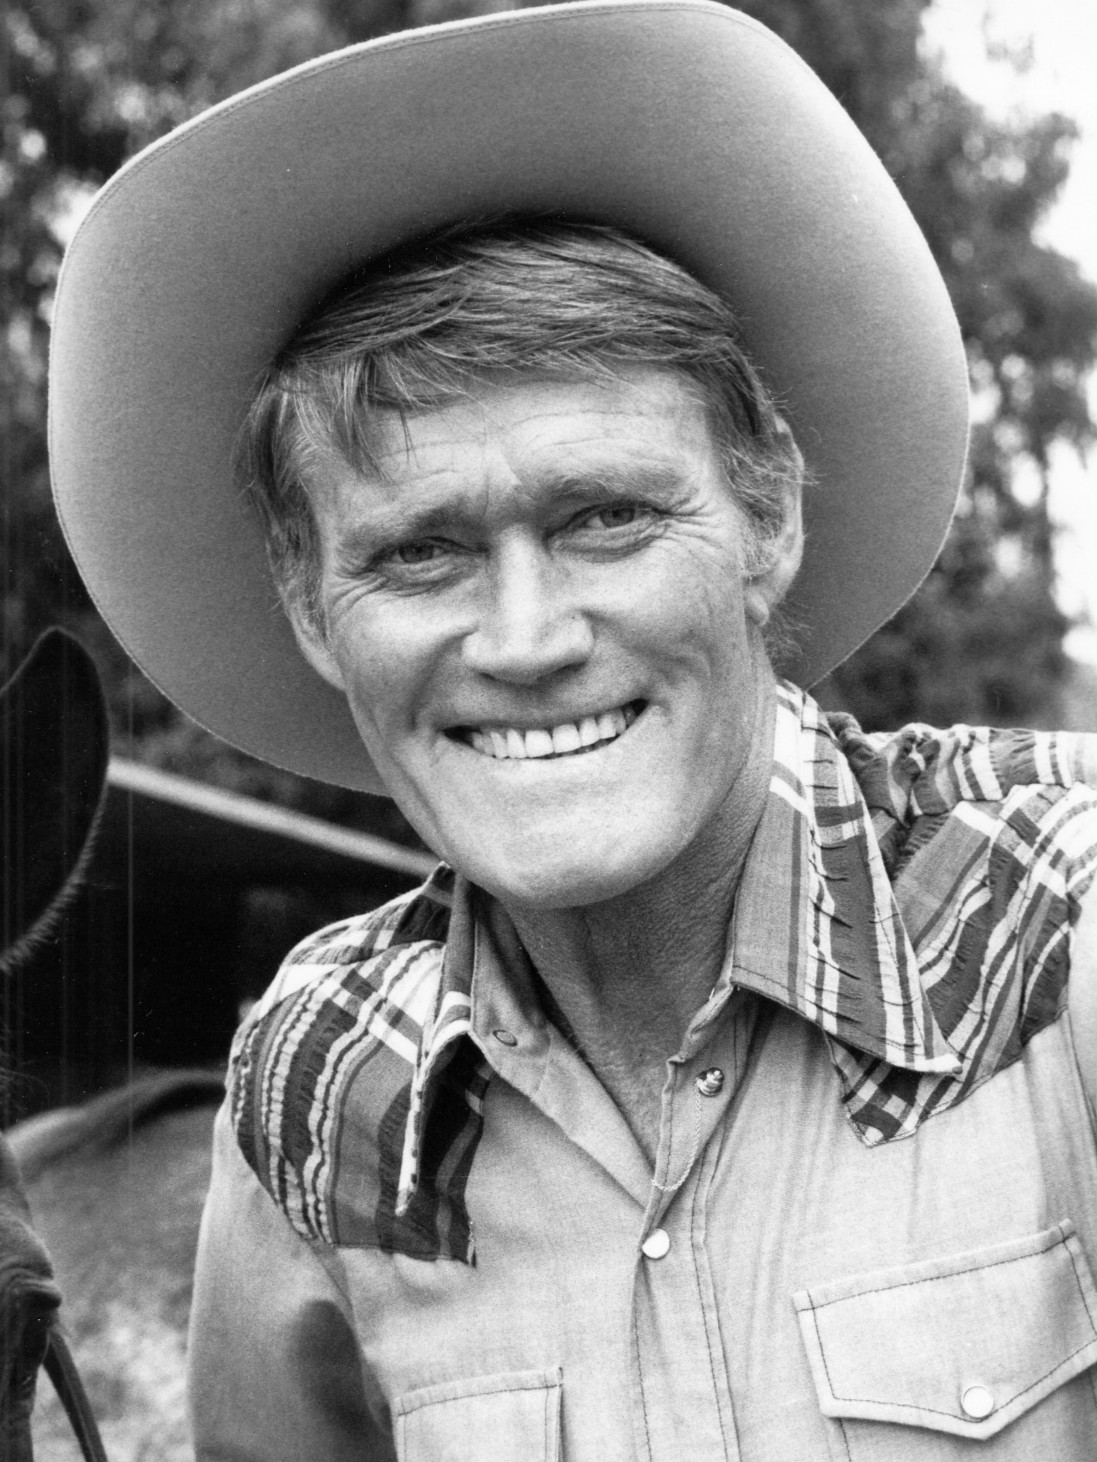 Amazing Things You Didn't Know About Chuck Connors The Rifleman